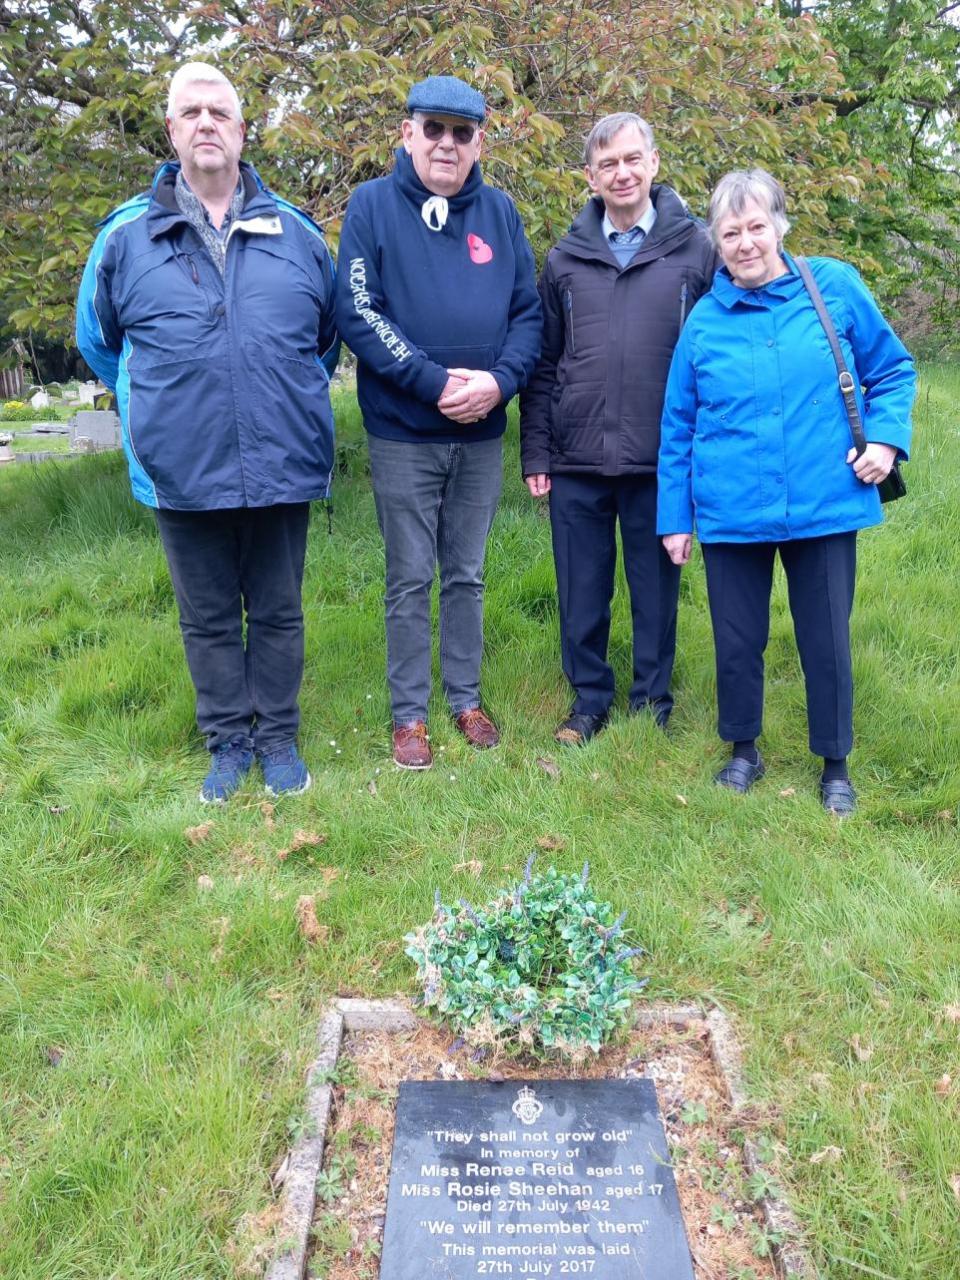 Wiltshire Times: Leslie Sheehan and Mrs Sheehan, along with Robert Wall of the Friends of The Down Cemetery, Mrs Jenny Wall, Pete Richardson, and Rick Owen of RBL Trowbridge, attended the cemetery to lay a wreath at the grave of cousins Rosie Sheehan and Renee Reid.